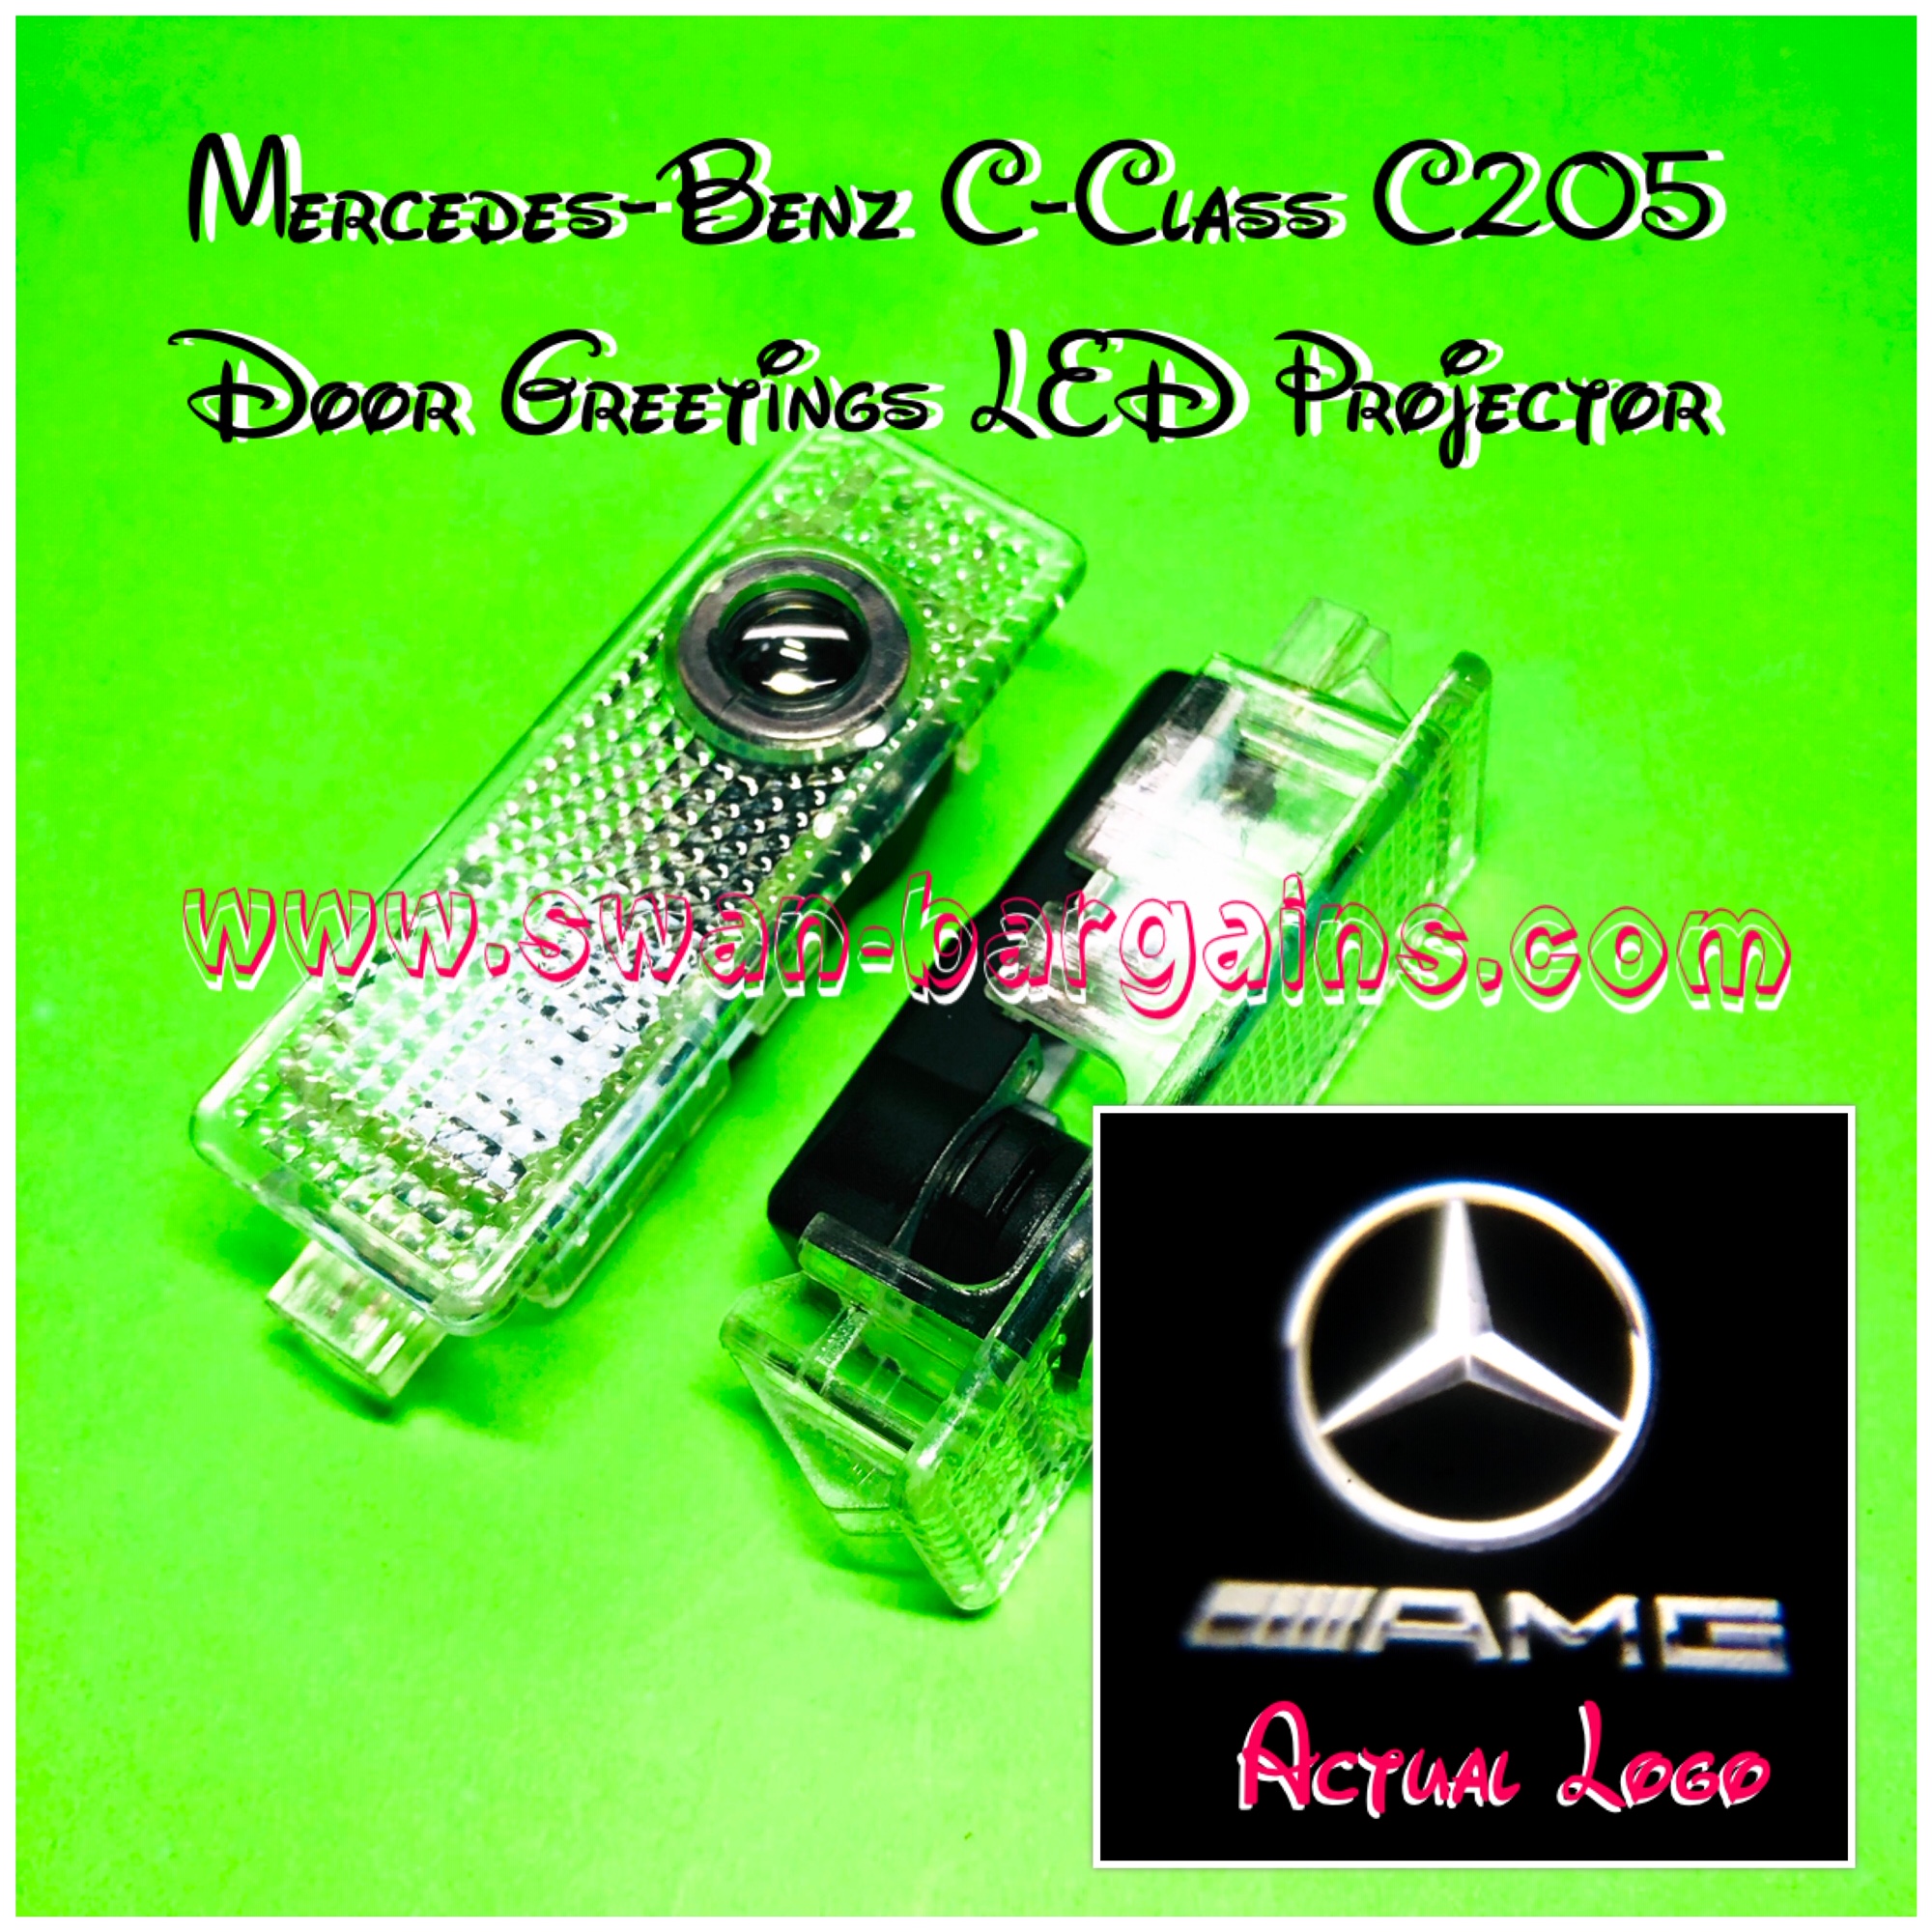 Benz C205 Door Courtesy LED Projector Lamp Singapore - Silver AMG